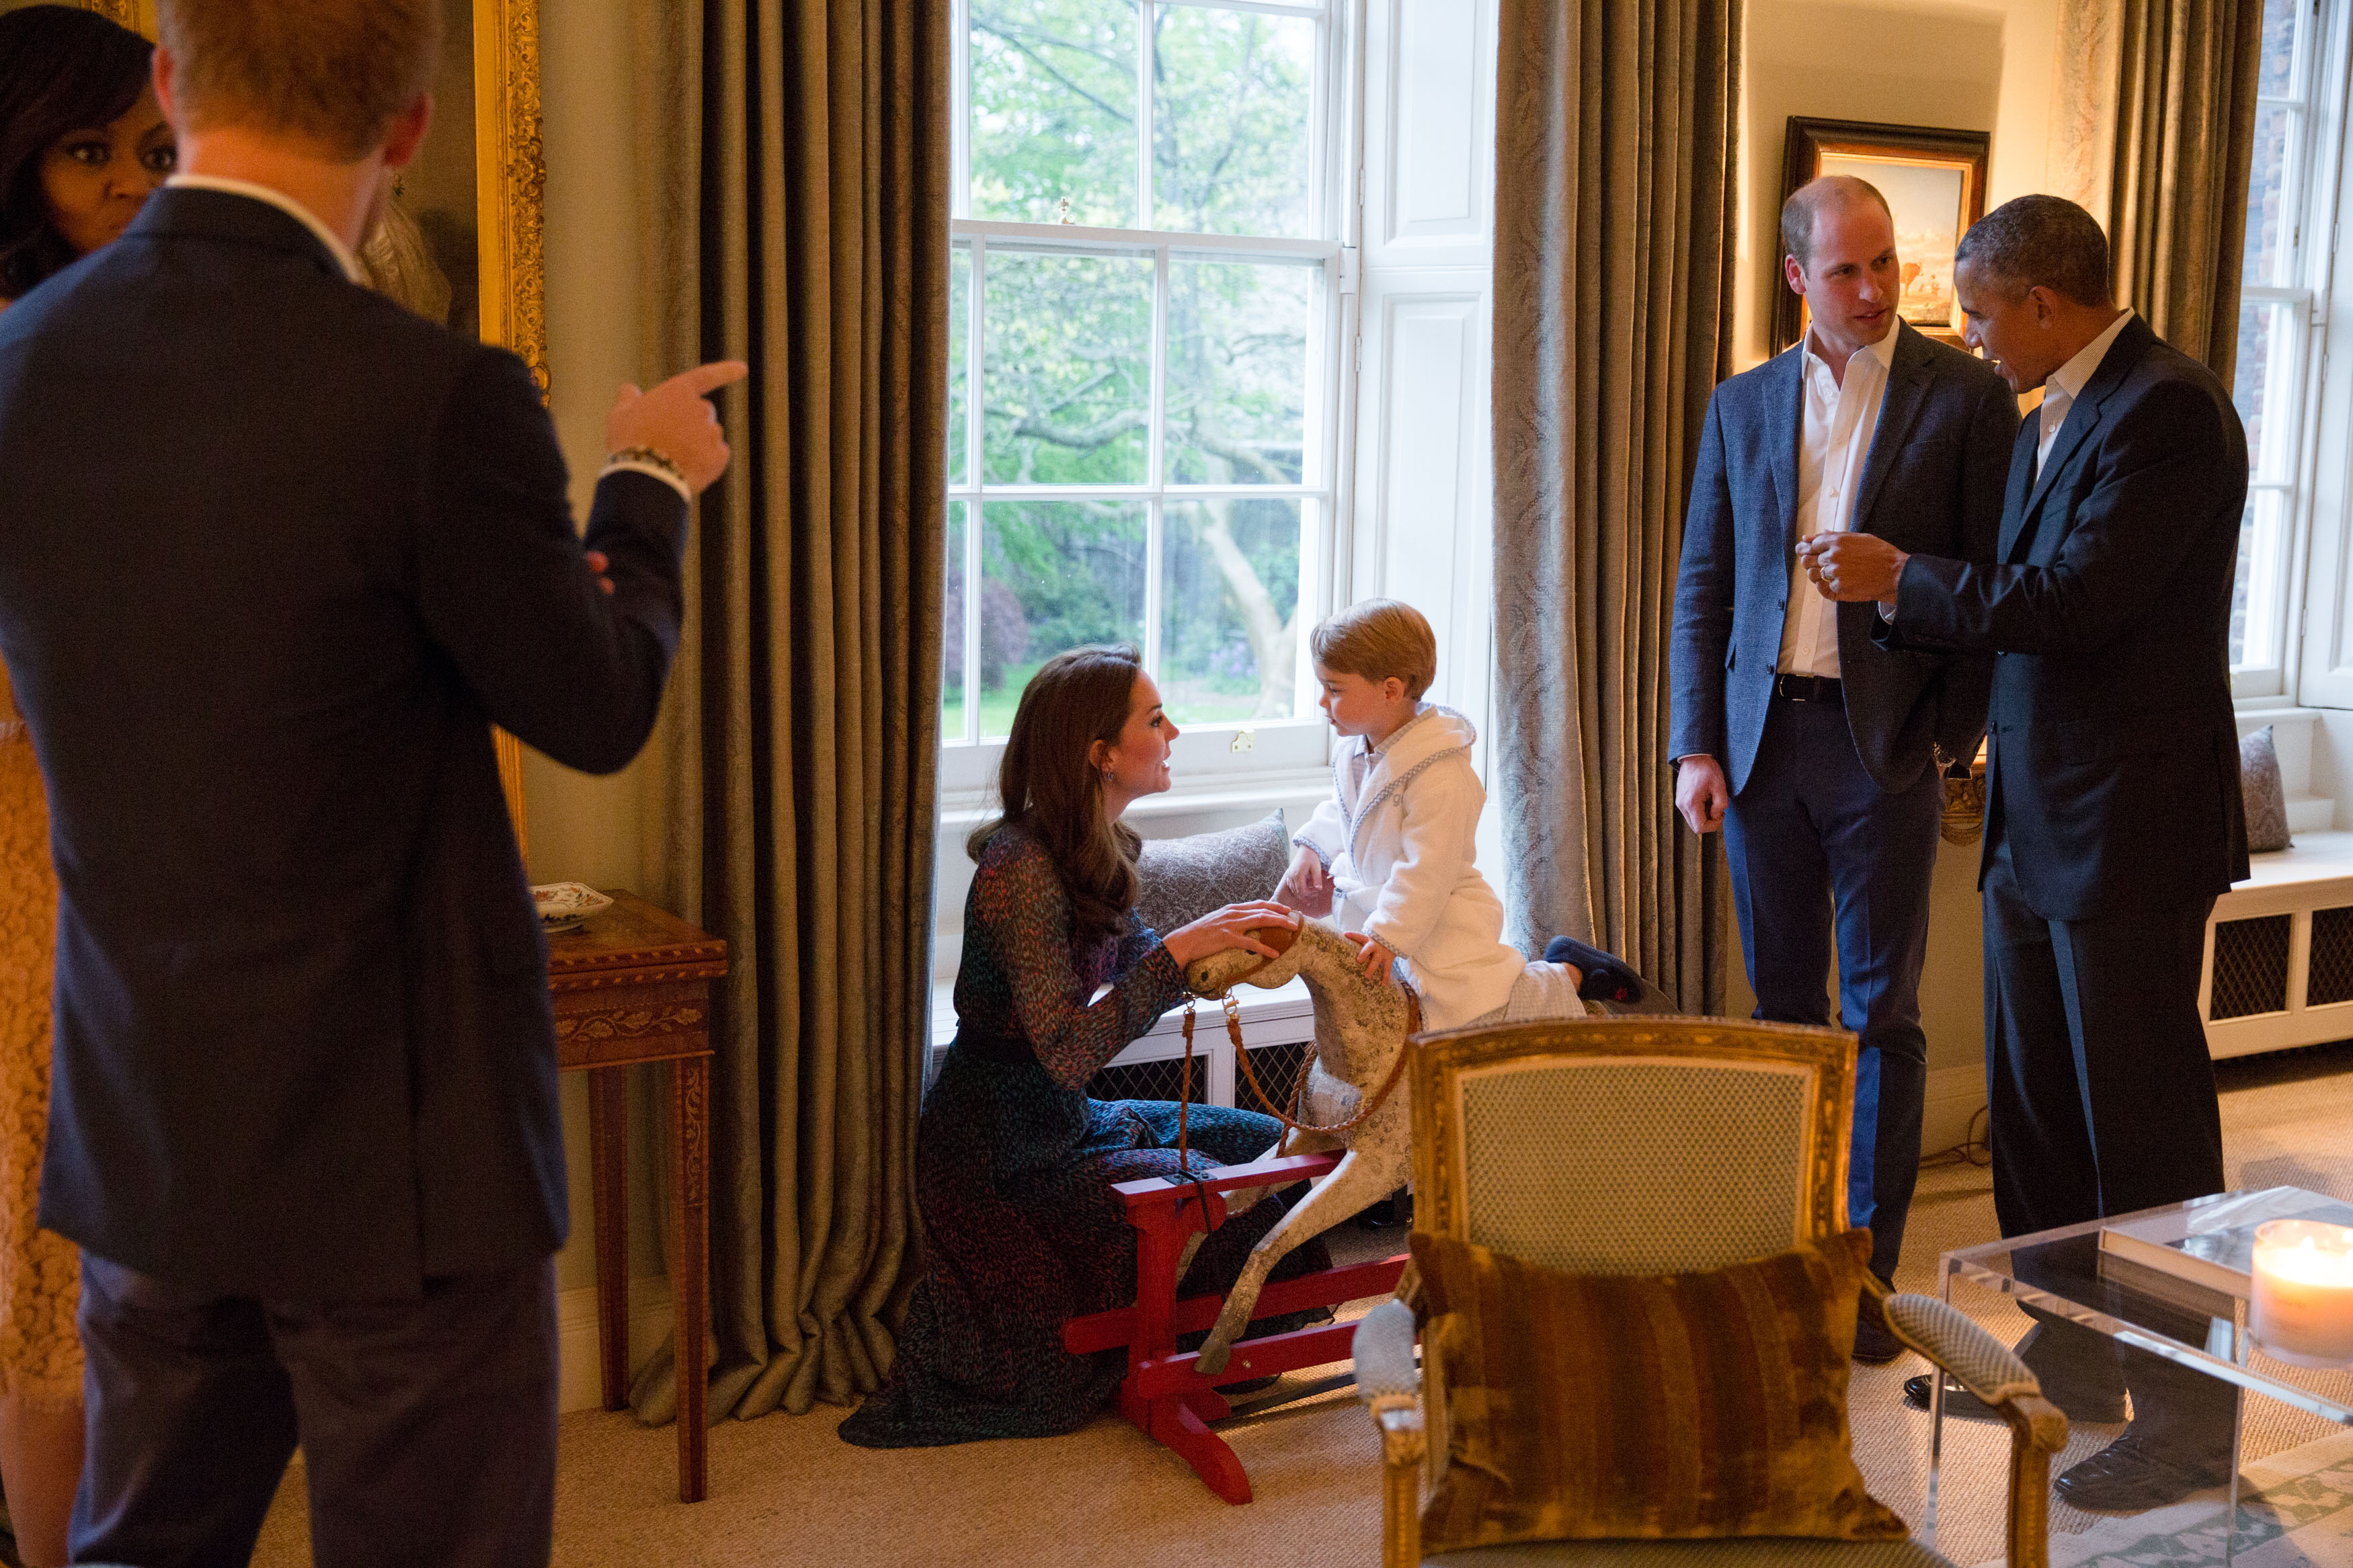 Prince George displays the robe from a rocking horse with the ease of a seasoned runway model as he meets the President and First Lady on April 22, 2016.